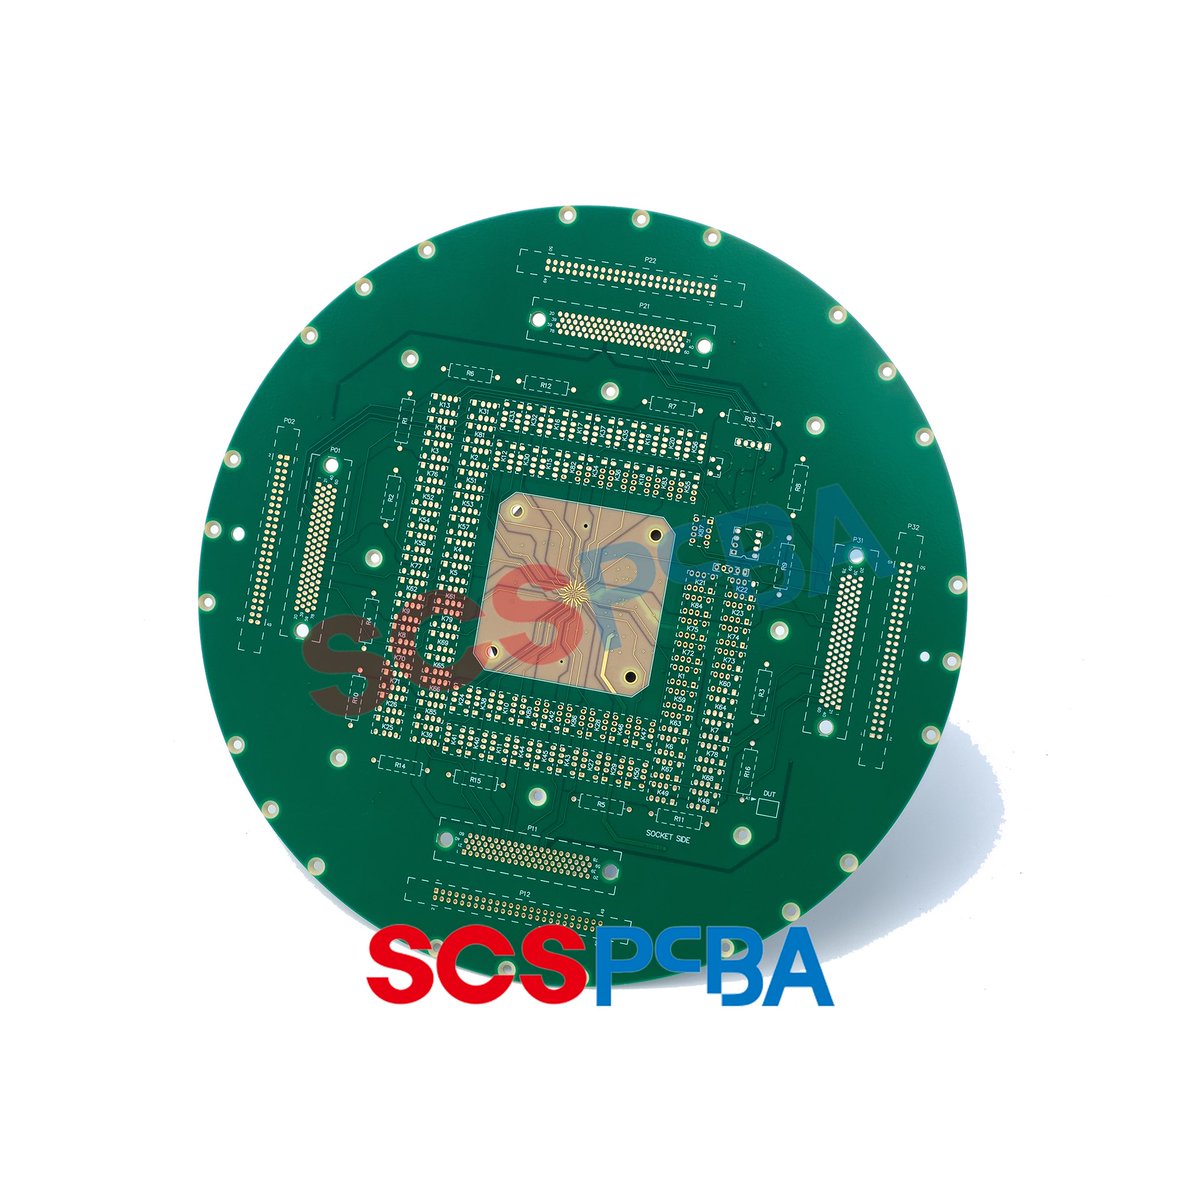 Counterbore PCBs are typically used in applications that require mounting screws or bolts and require a flat surface. 😊

#pcb #pcba #scspcba #pcbassembly #semi #ems #oem #fyp #electronic #technology #counterbore #smt #dip